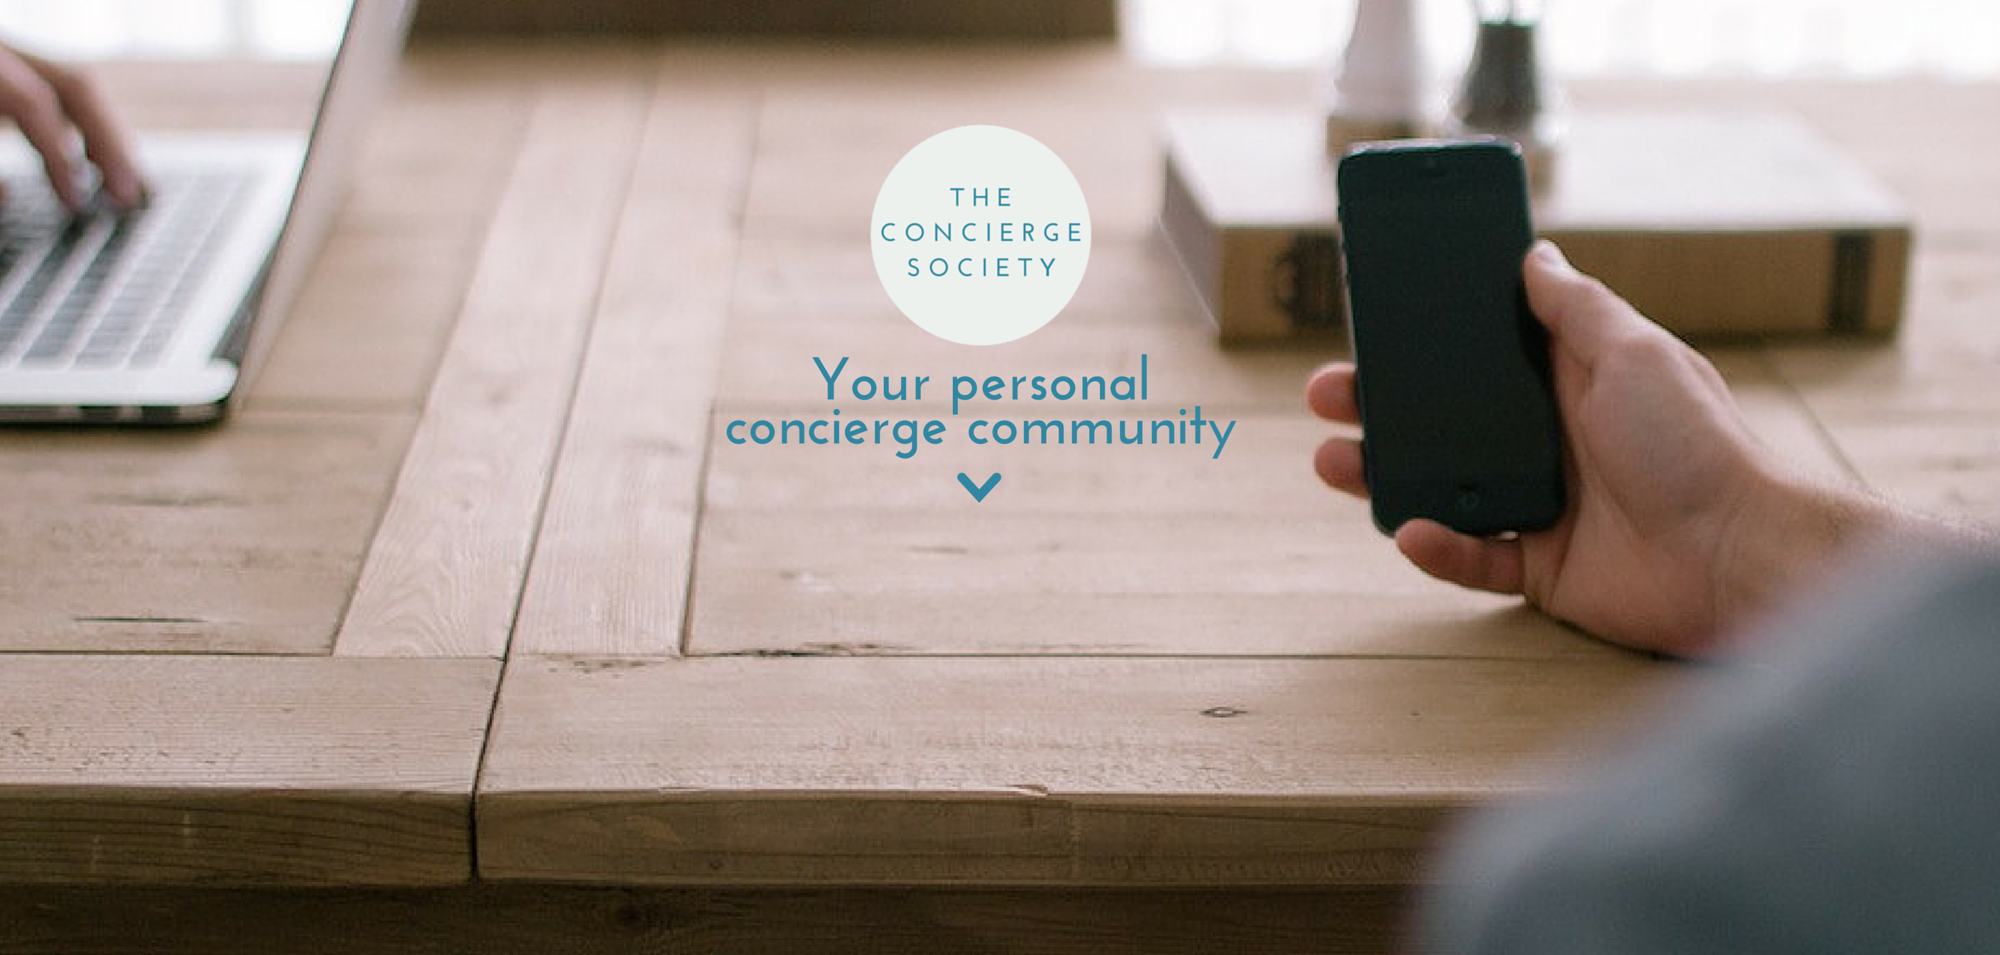 How to Get Started Working at Home as a Personal Concierge